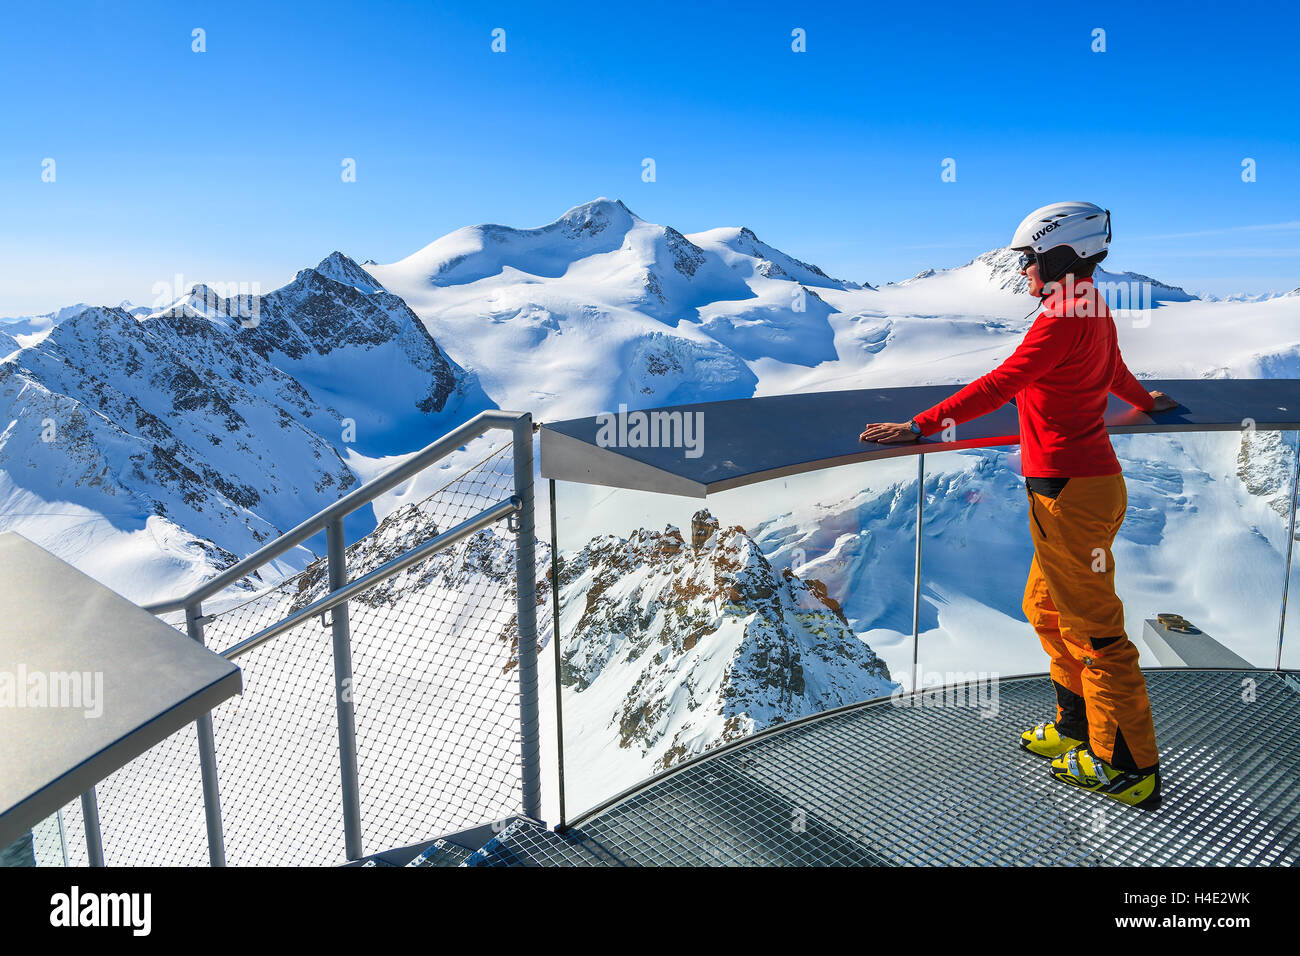 PITZTAL SKI RESORT, AUSTRIA - MAR 29, 2014: Woman skier standing on platform looking at Wildspitze mountain, second highest peak in Austria. March is most sunny month for ski holidays. Stock Photo